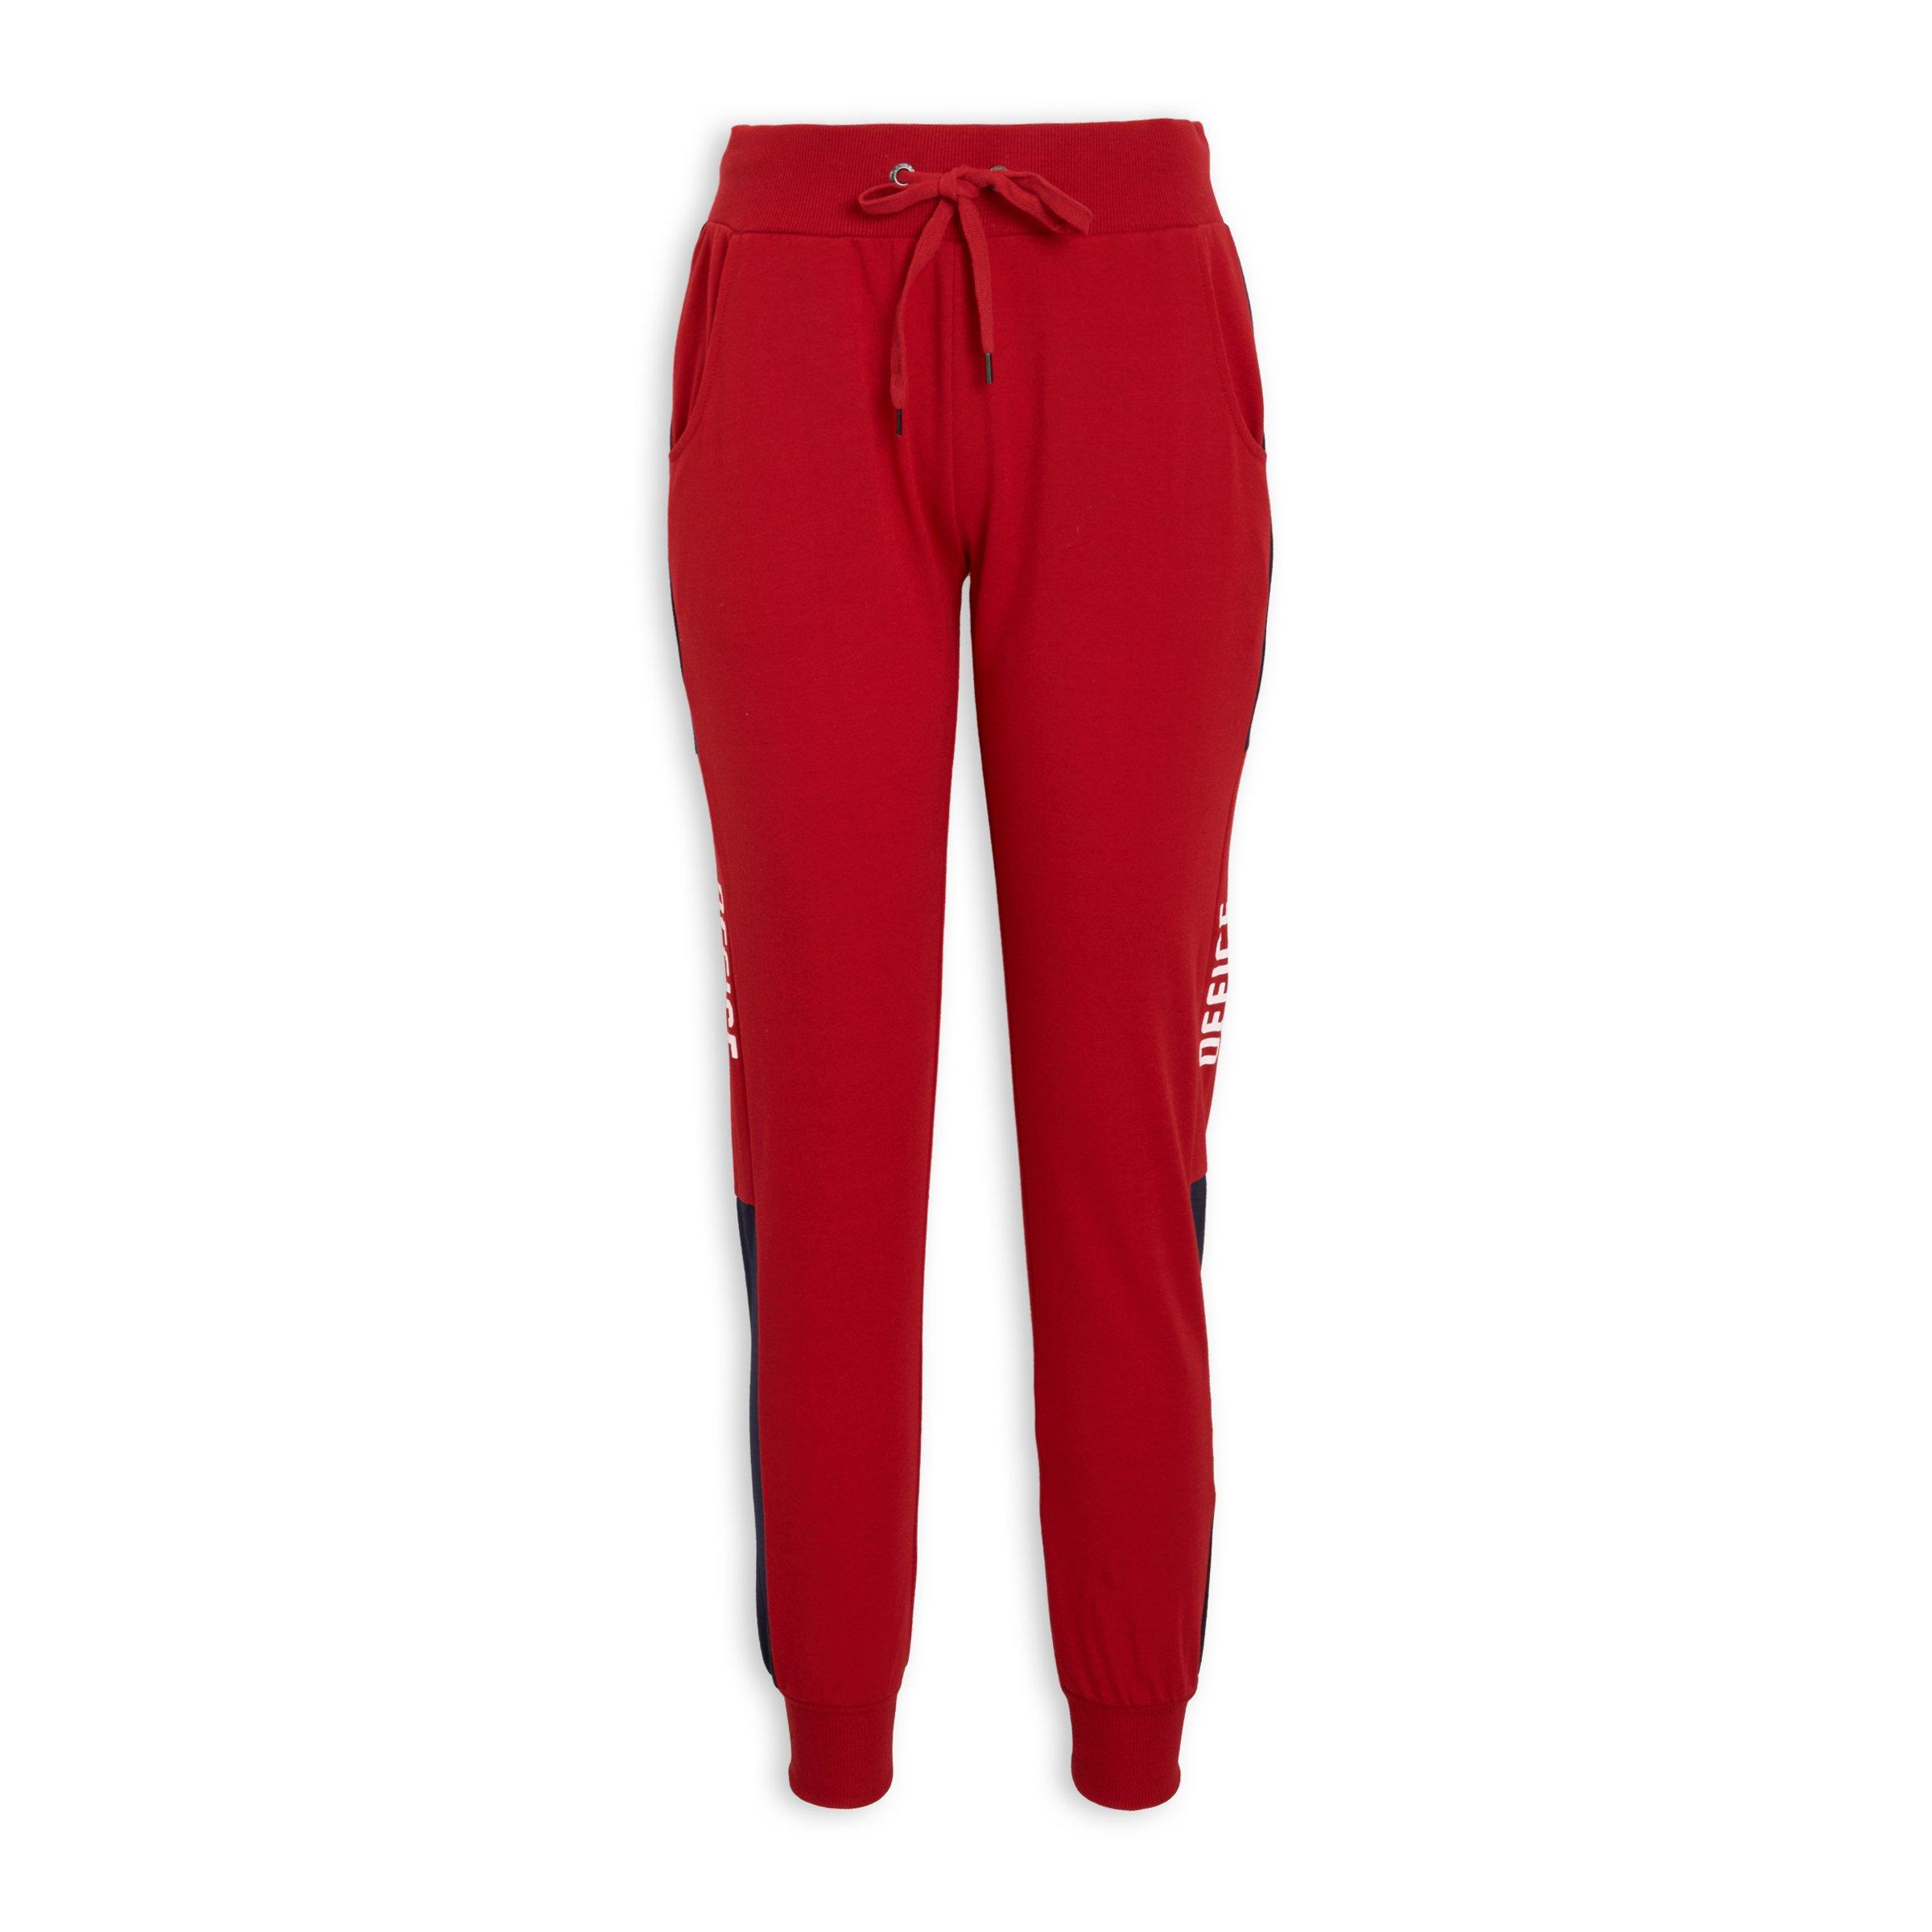 Buy OFFICE London Red Jogger Clothing Online | Office London